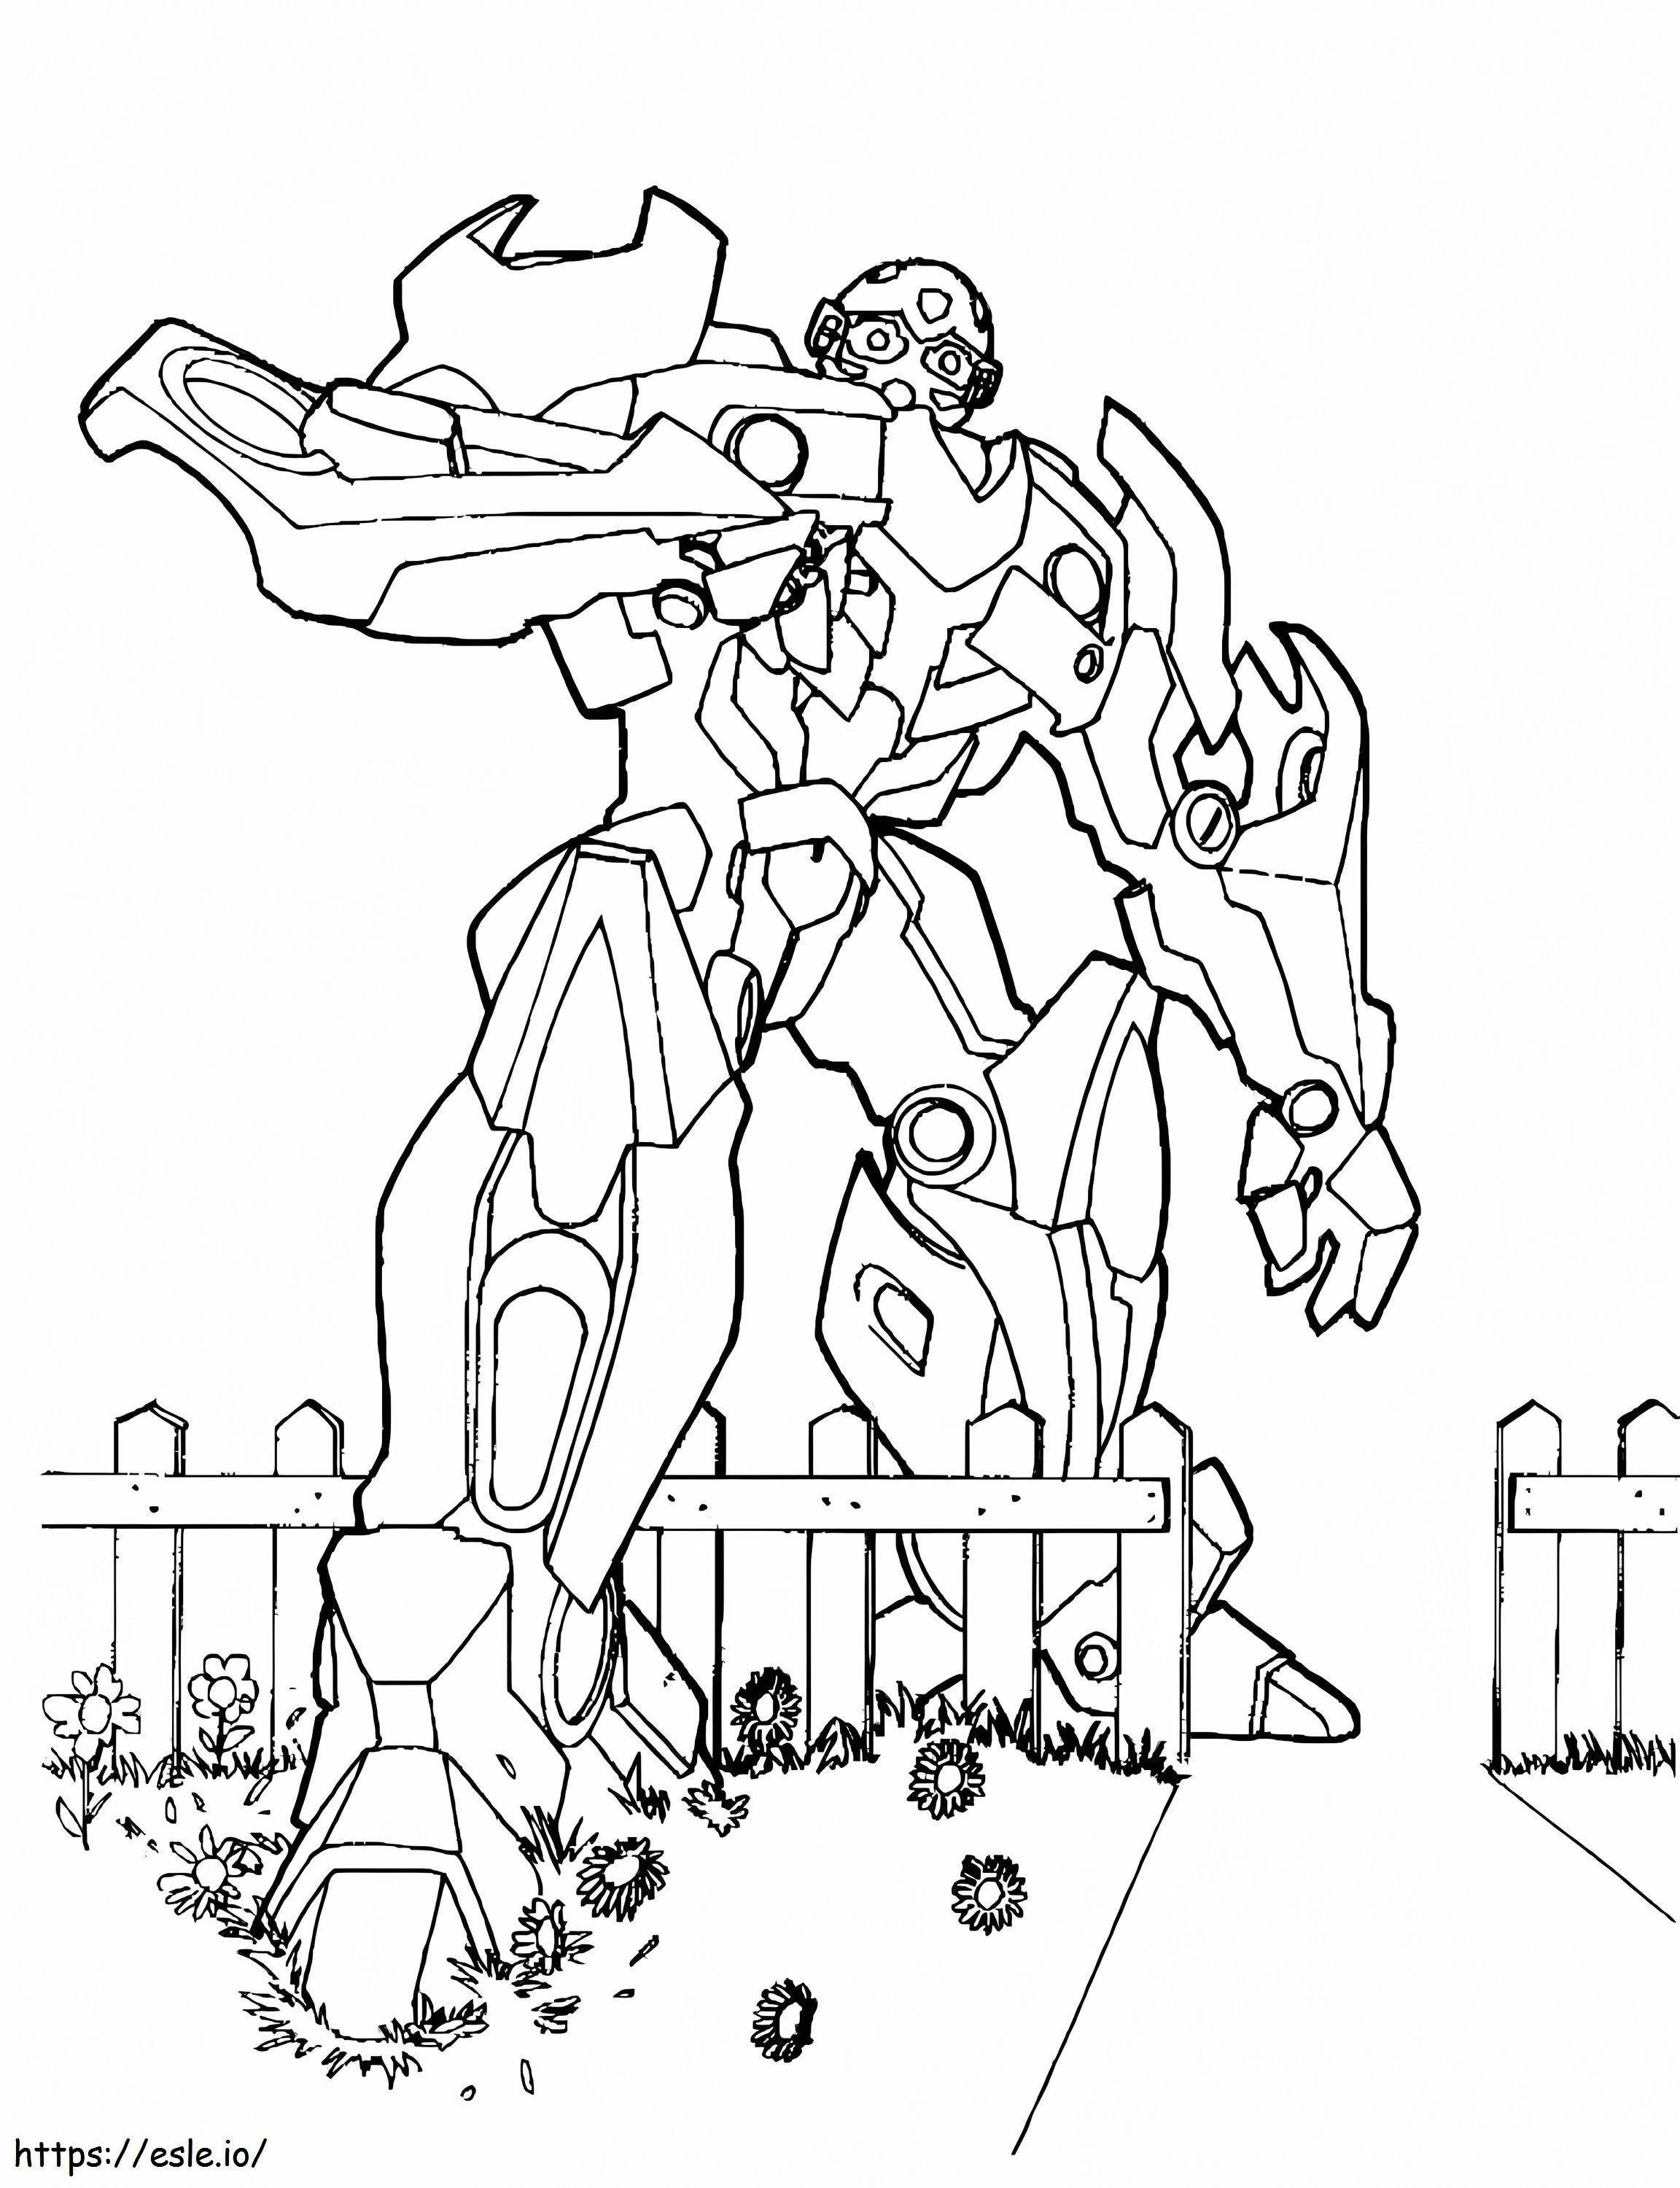 Bumblebee 4 coloring page